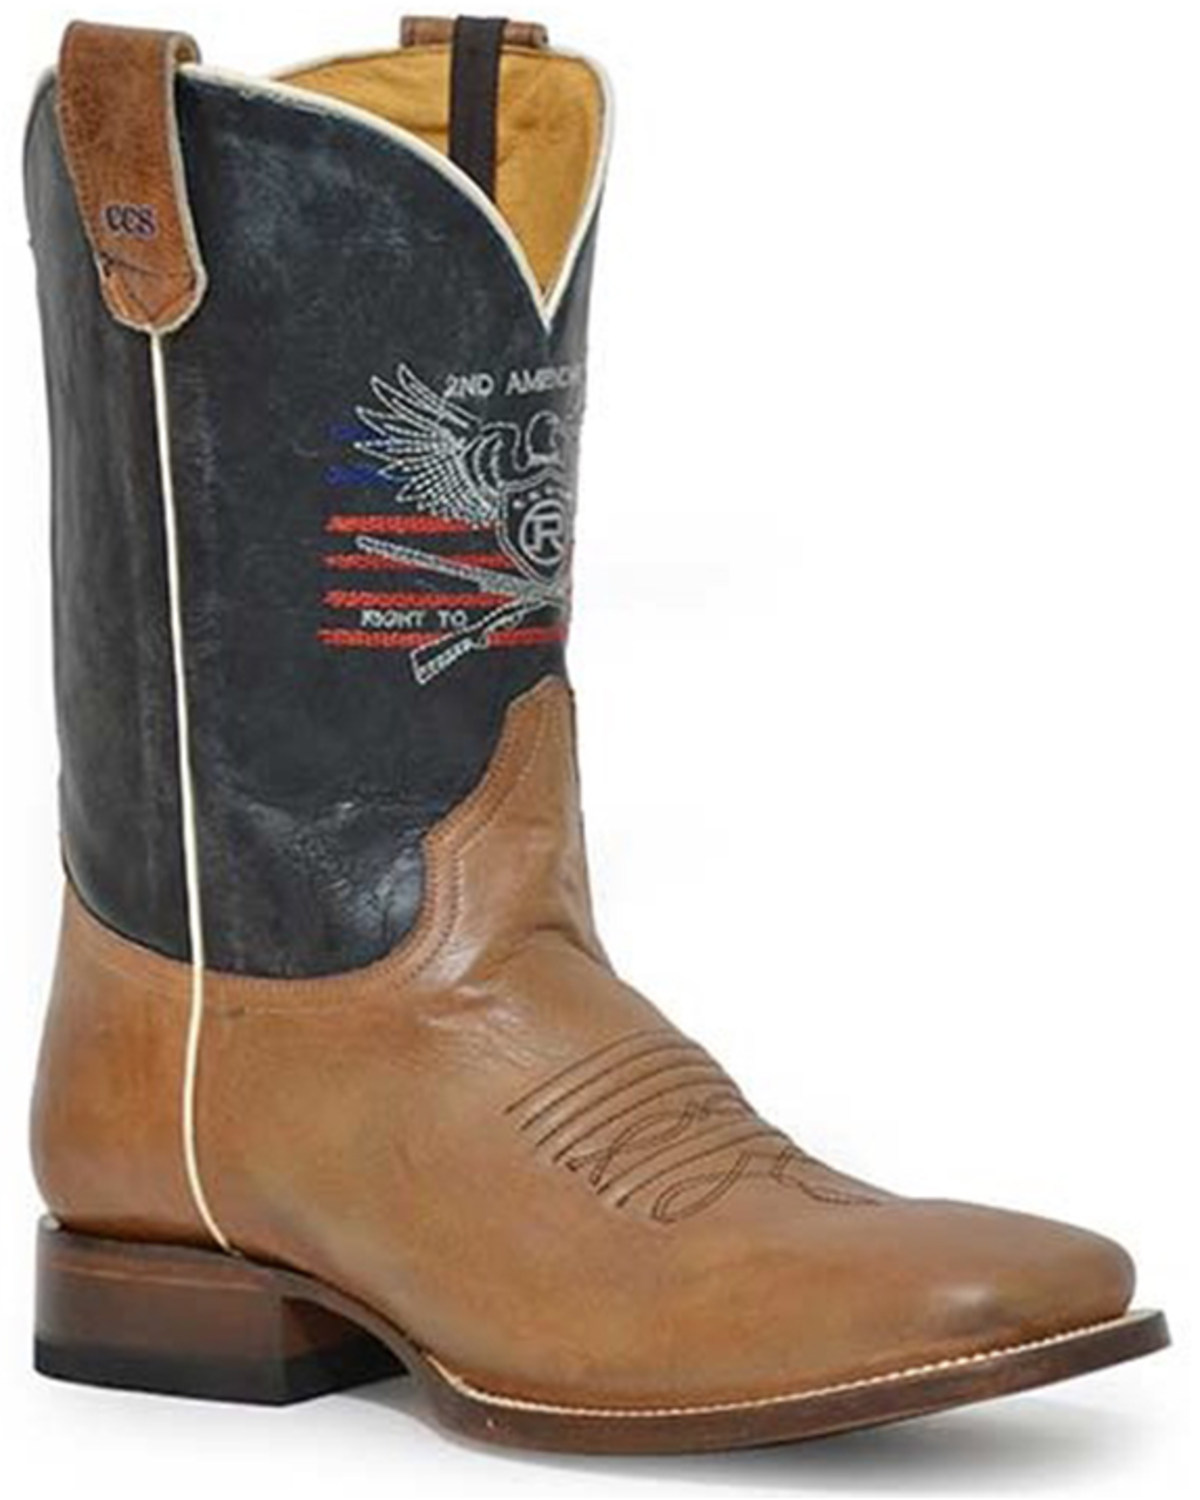 Roper Men's 2nd Amendment Concealed Carry Performance Western Boots - Square Toe